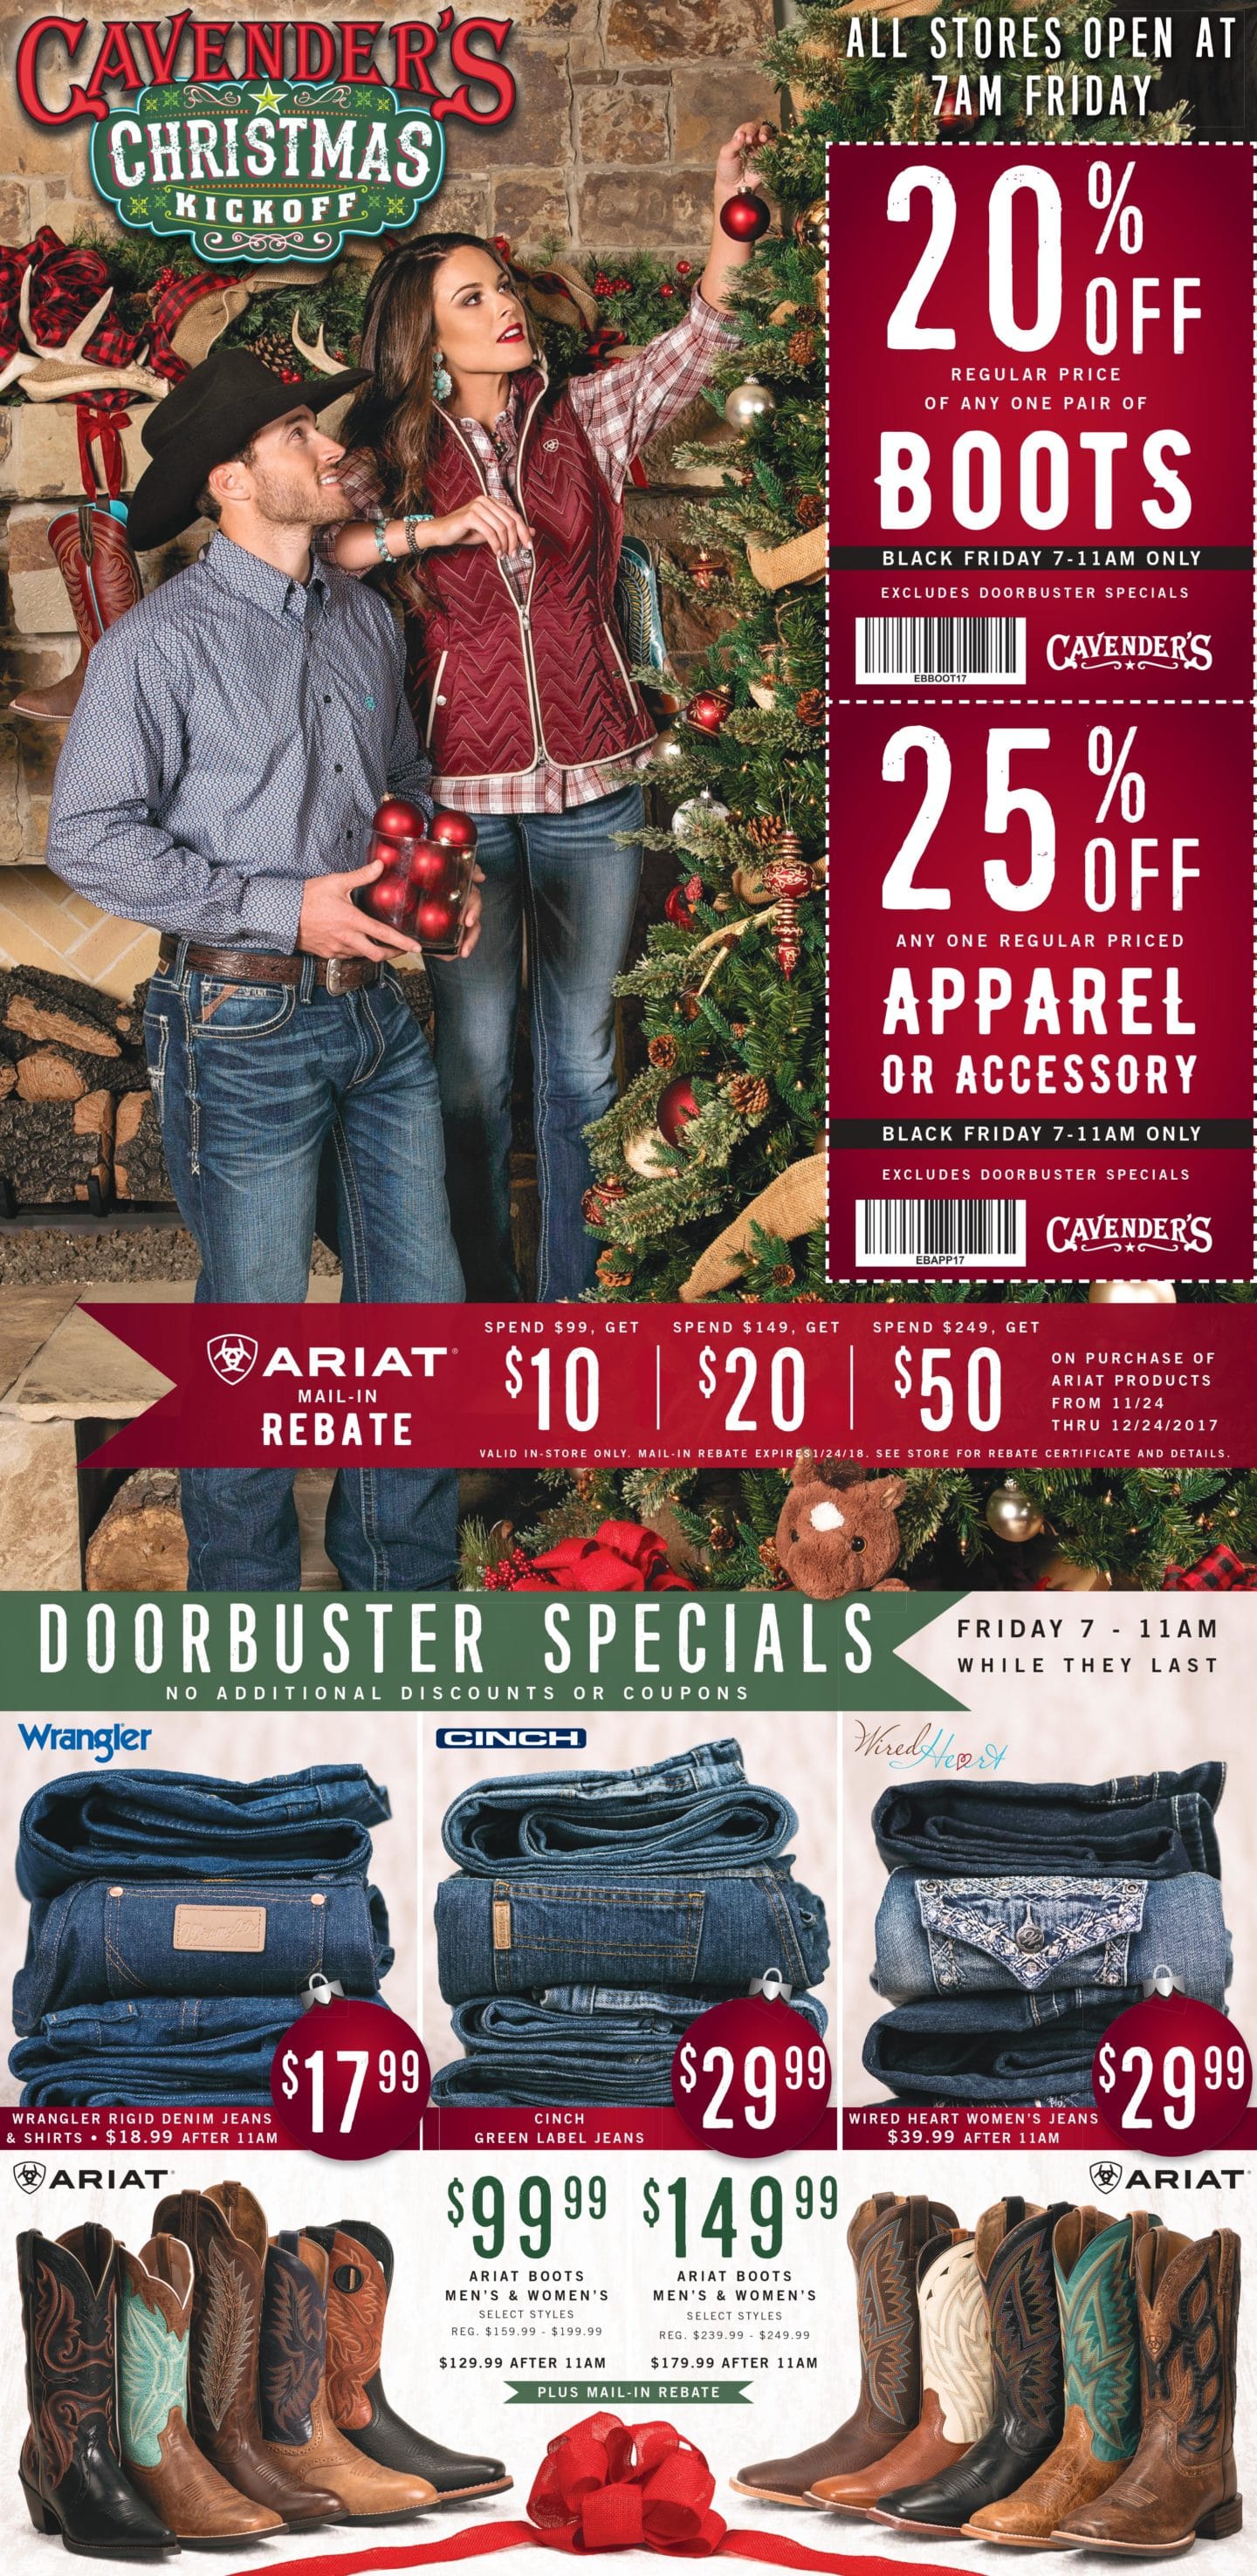 Cavender's Black Friday Ad 2017 - Does Lucchese Have Black Friday Deals